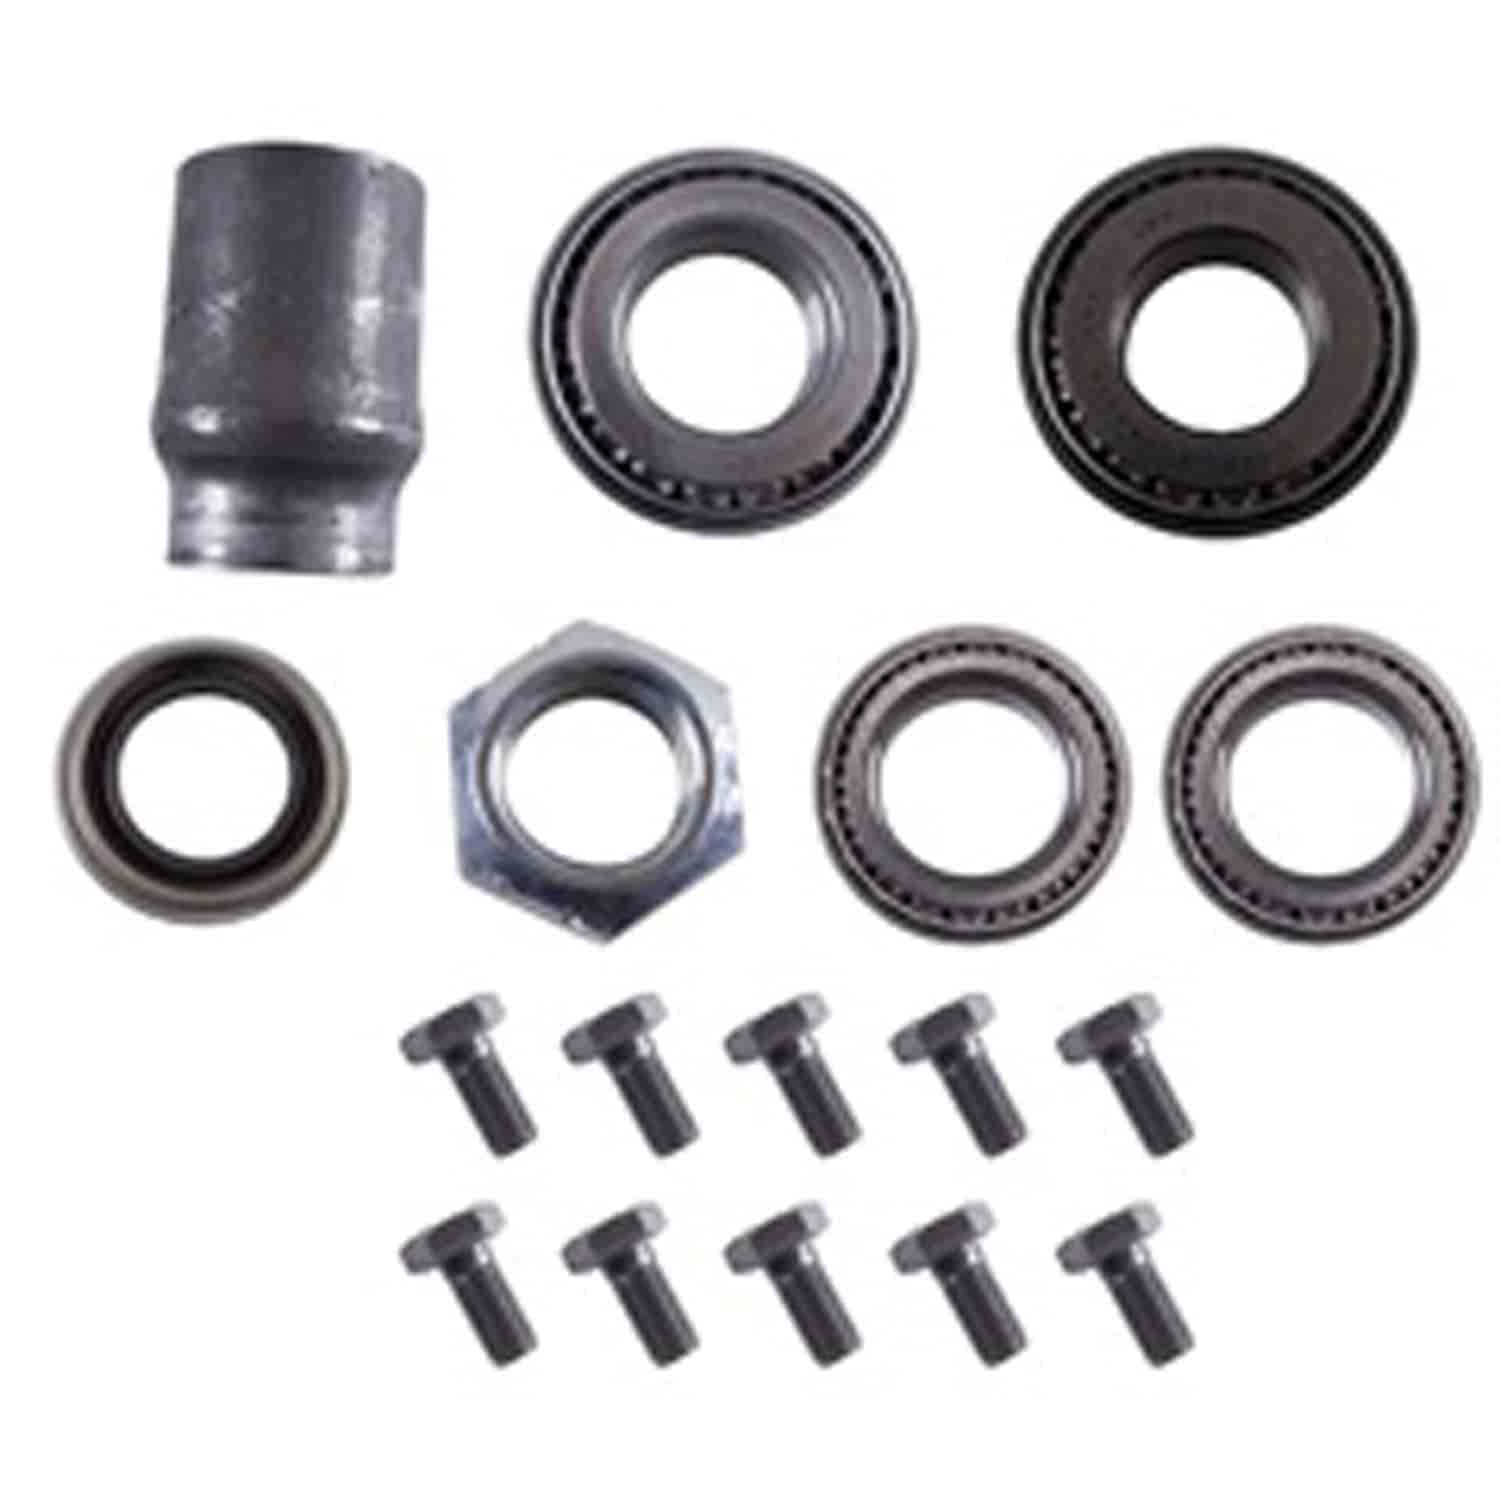 This differential rebuild kit from Omix-ADA fits 99-00 Jeep Grand Cherokee WJ with Dana 44 Rear Before 3/29/00